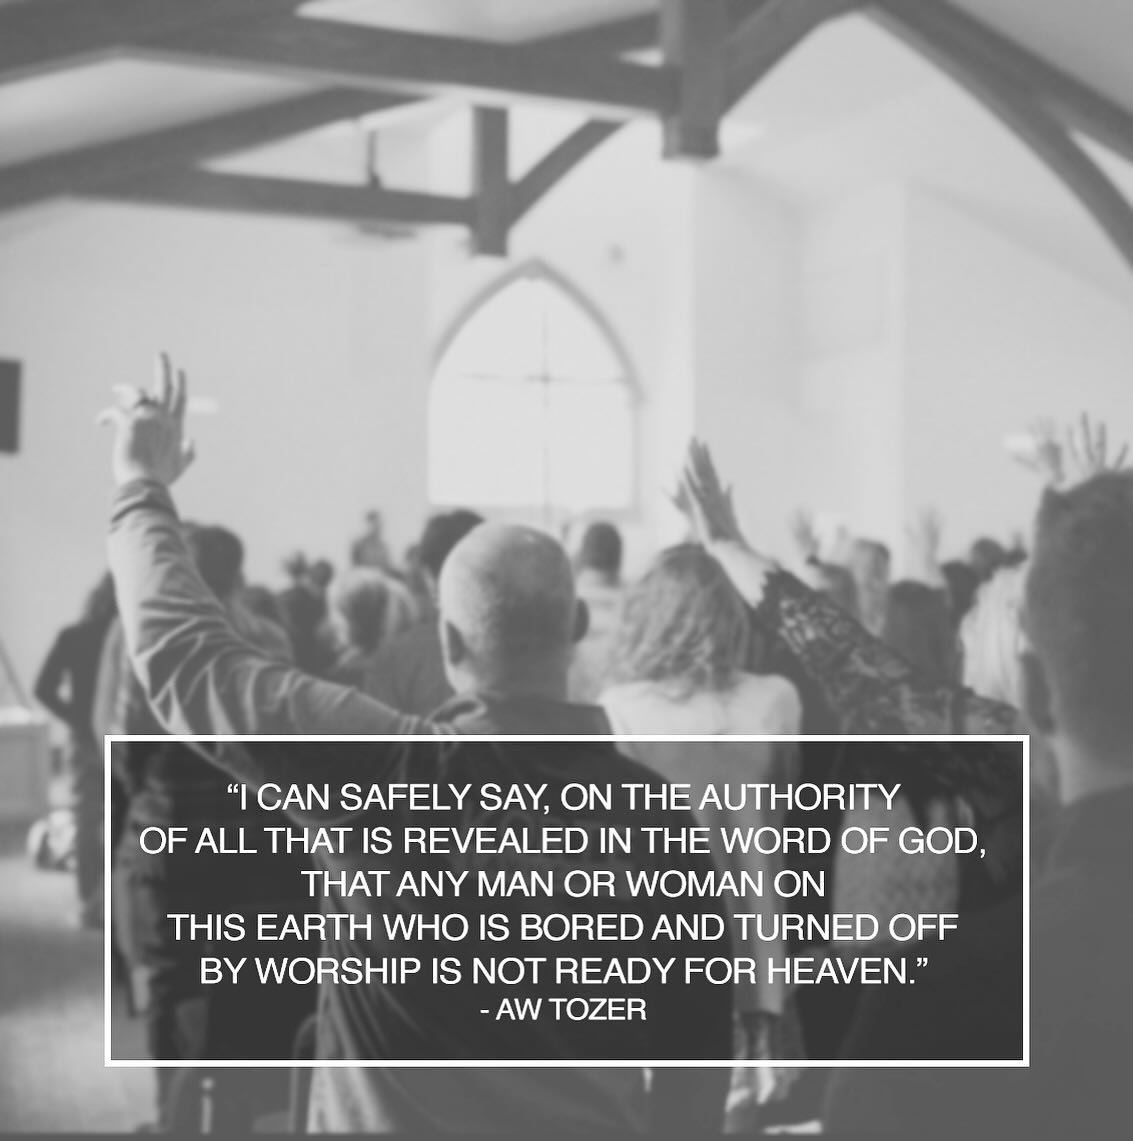 &ldquo;I can safely say, on the authority of all that is revealed in the Word of God, that any man or woman on this earth who is bored and turned off by worship is not ready for heaven.&rdquo; #awtozer #worship